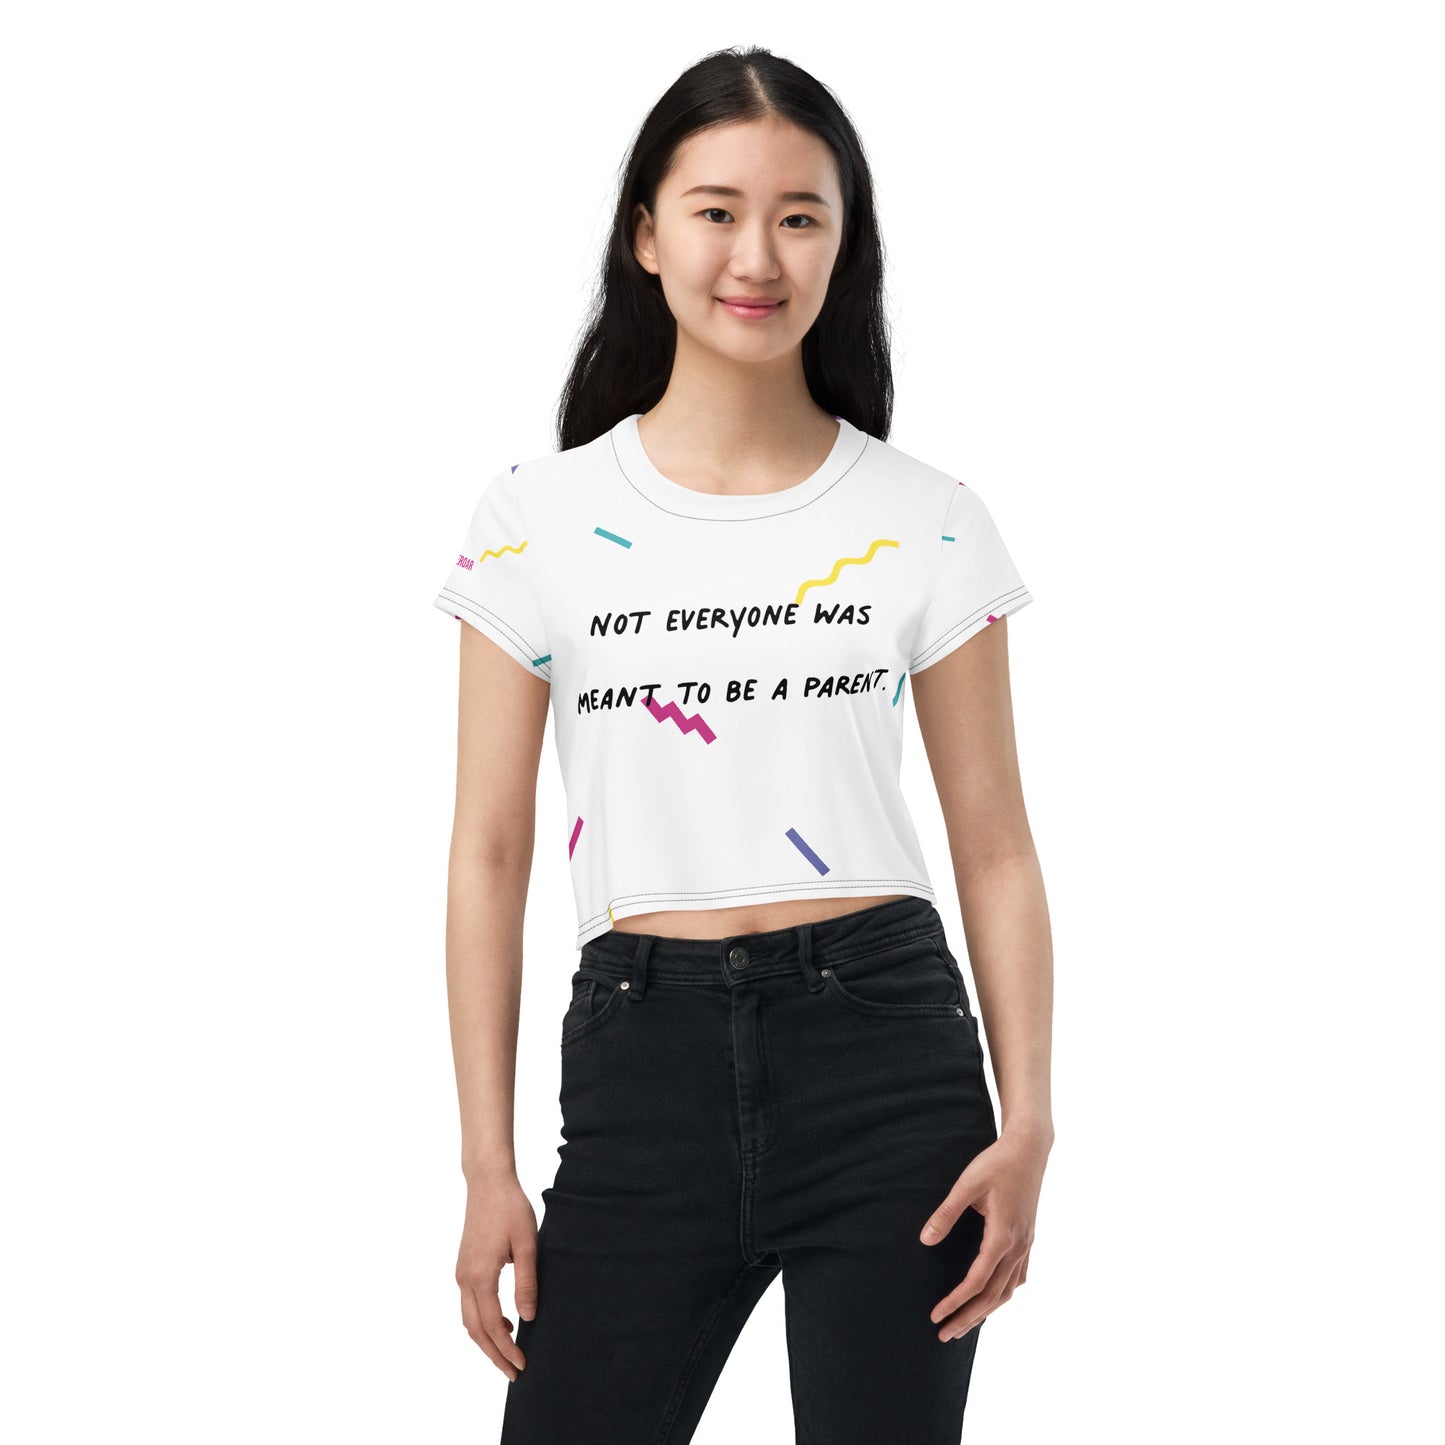 Not Everyone Was Meant To Be A Parent Retro Crop Top